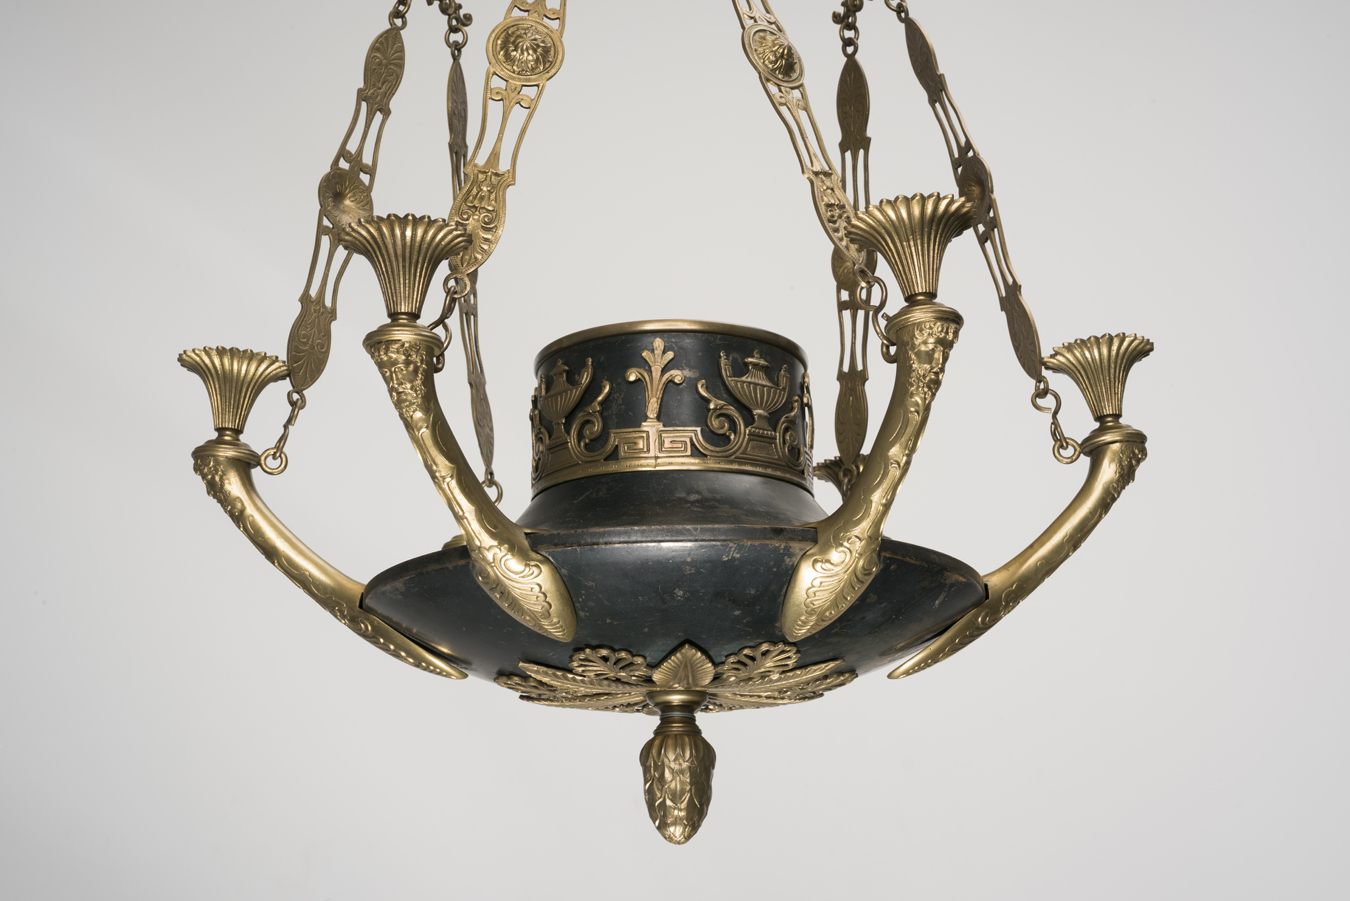 A fragment of the chandelier, the 2nd half of the 19th c., the National Museum of Lithuania, IM-2991. Photo by Kęstutis Stoškus, 2019